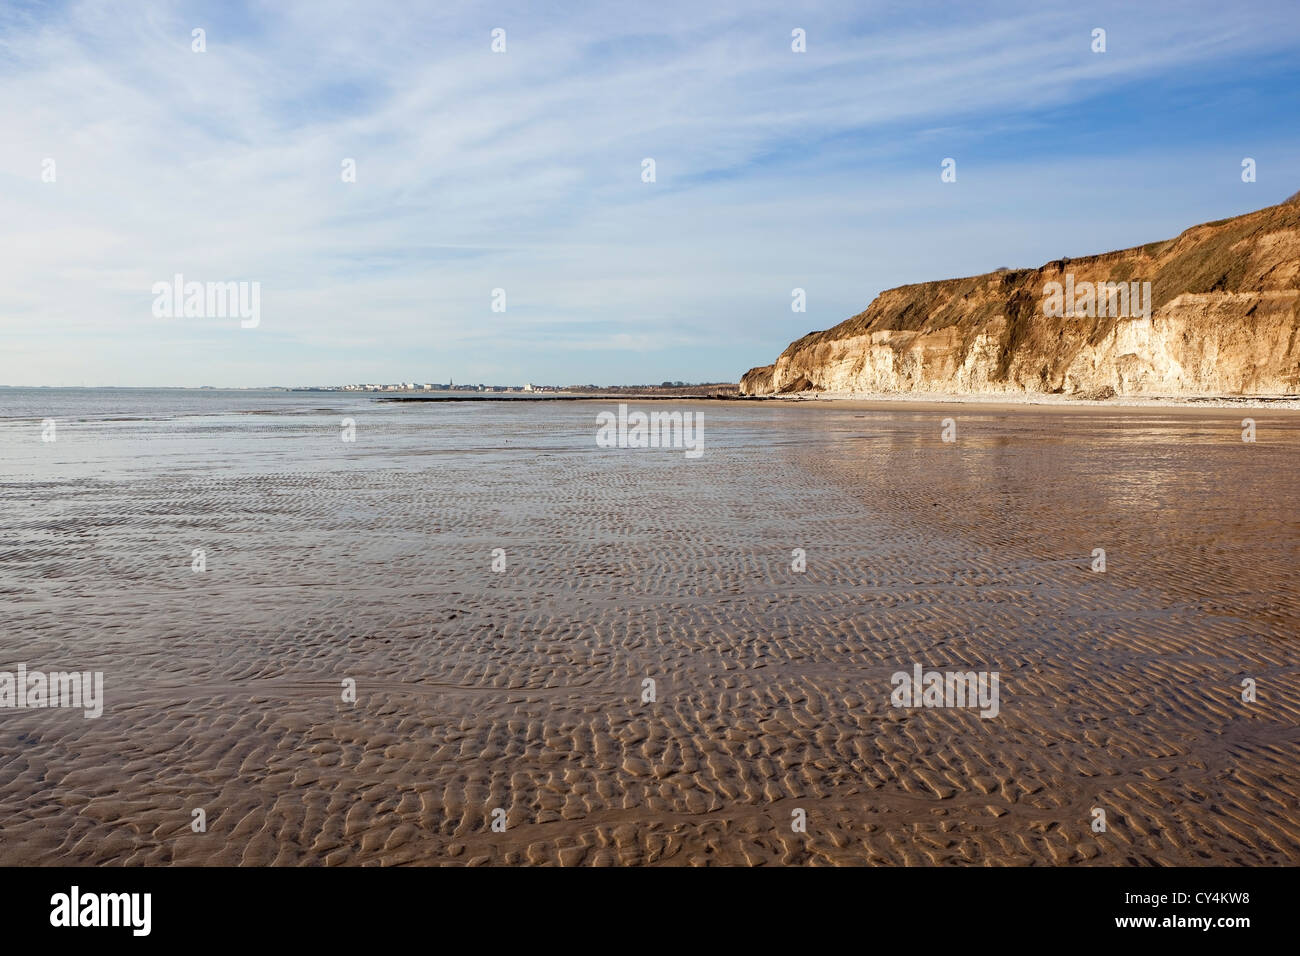 A view along the rippled sand beach at Dane's dyke, South towards the seaside town of Bridlington on Yorkshire's East coast Stock Photo